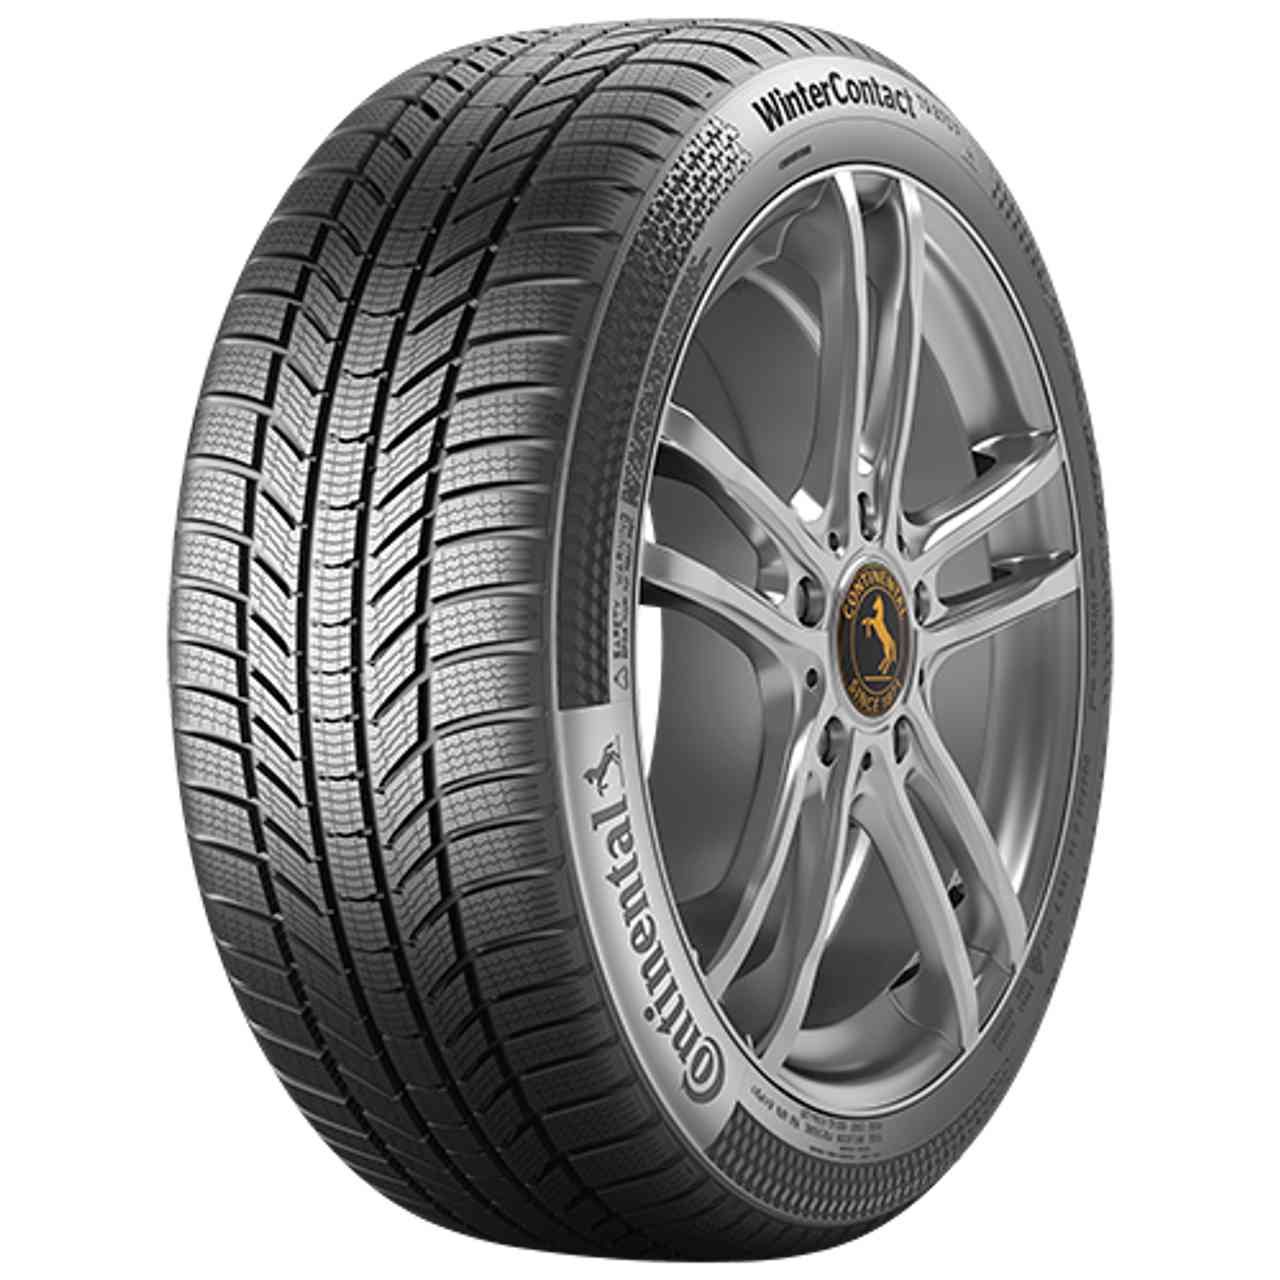 CONTINENTAL WINTERCONTACT TS 870 P (EVc) 235/55R19 105W FR BSW